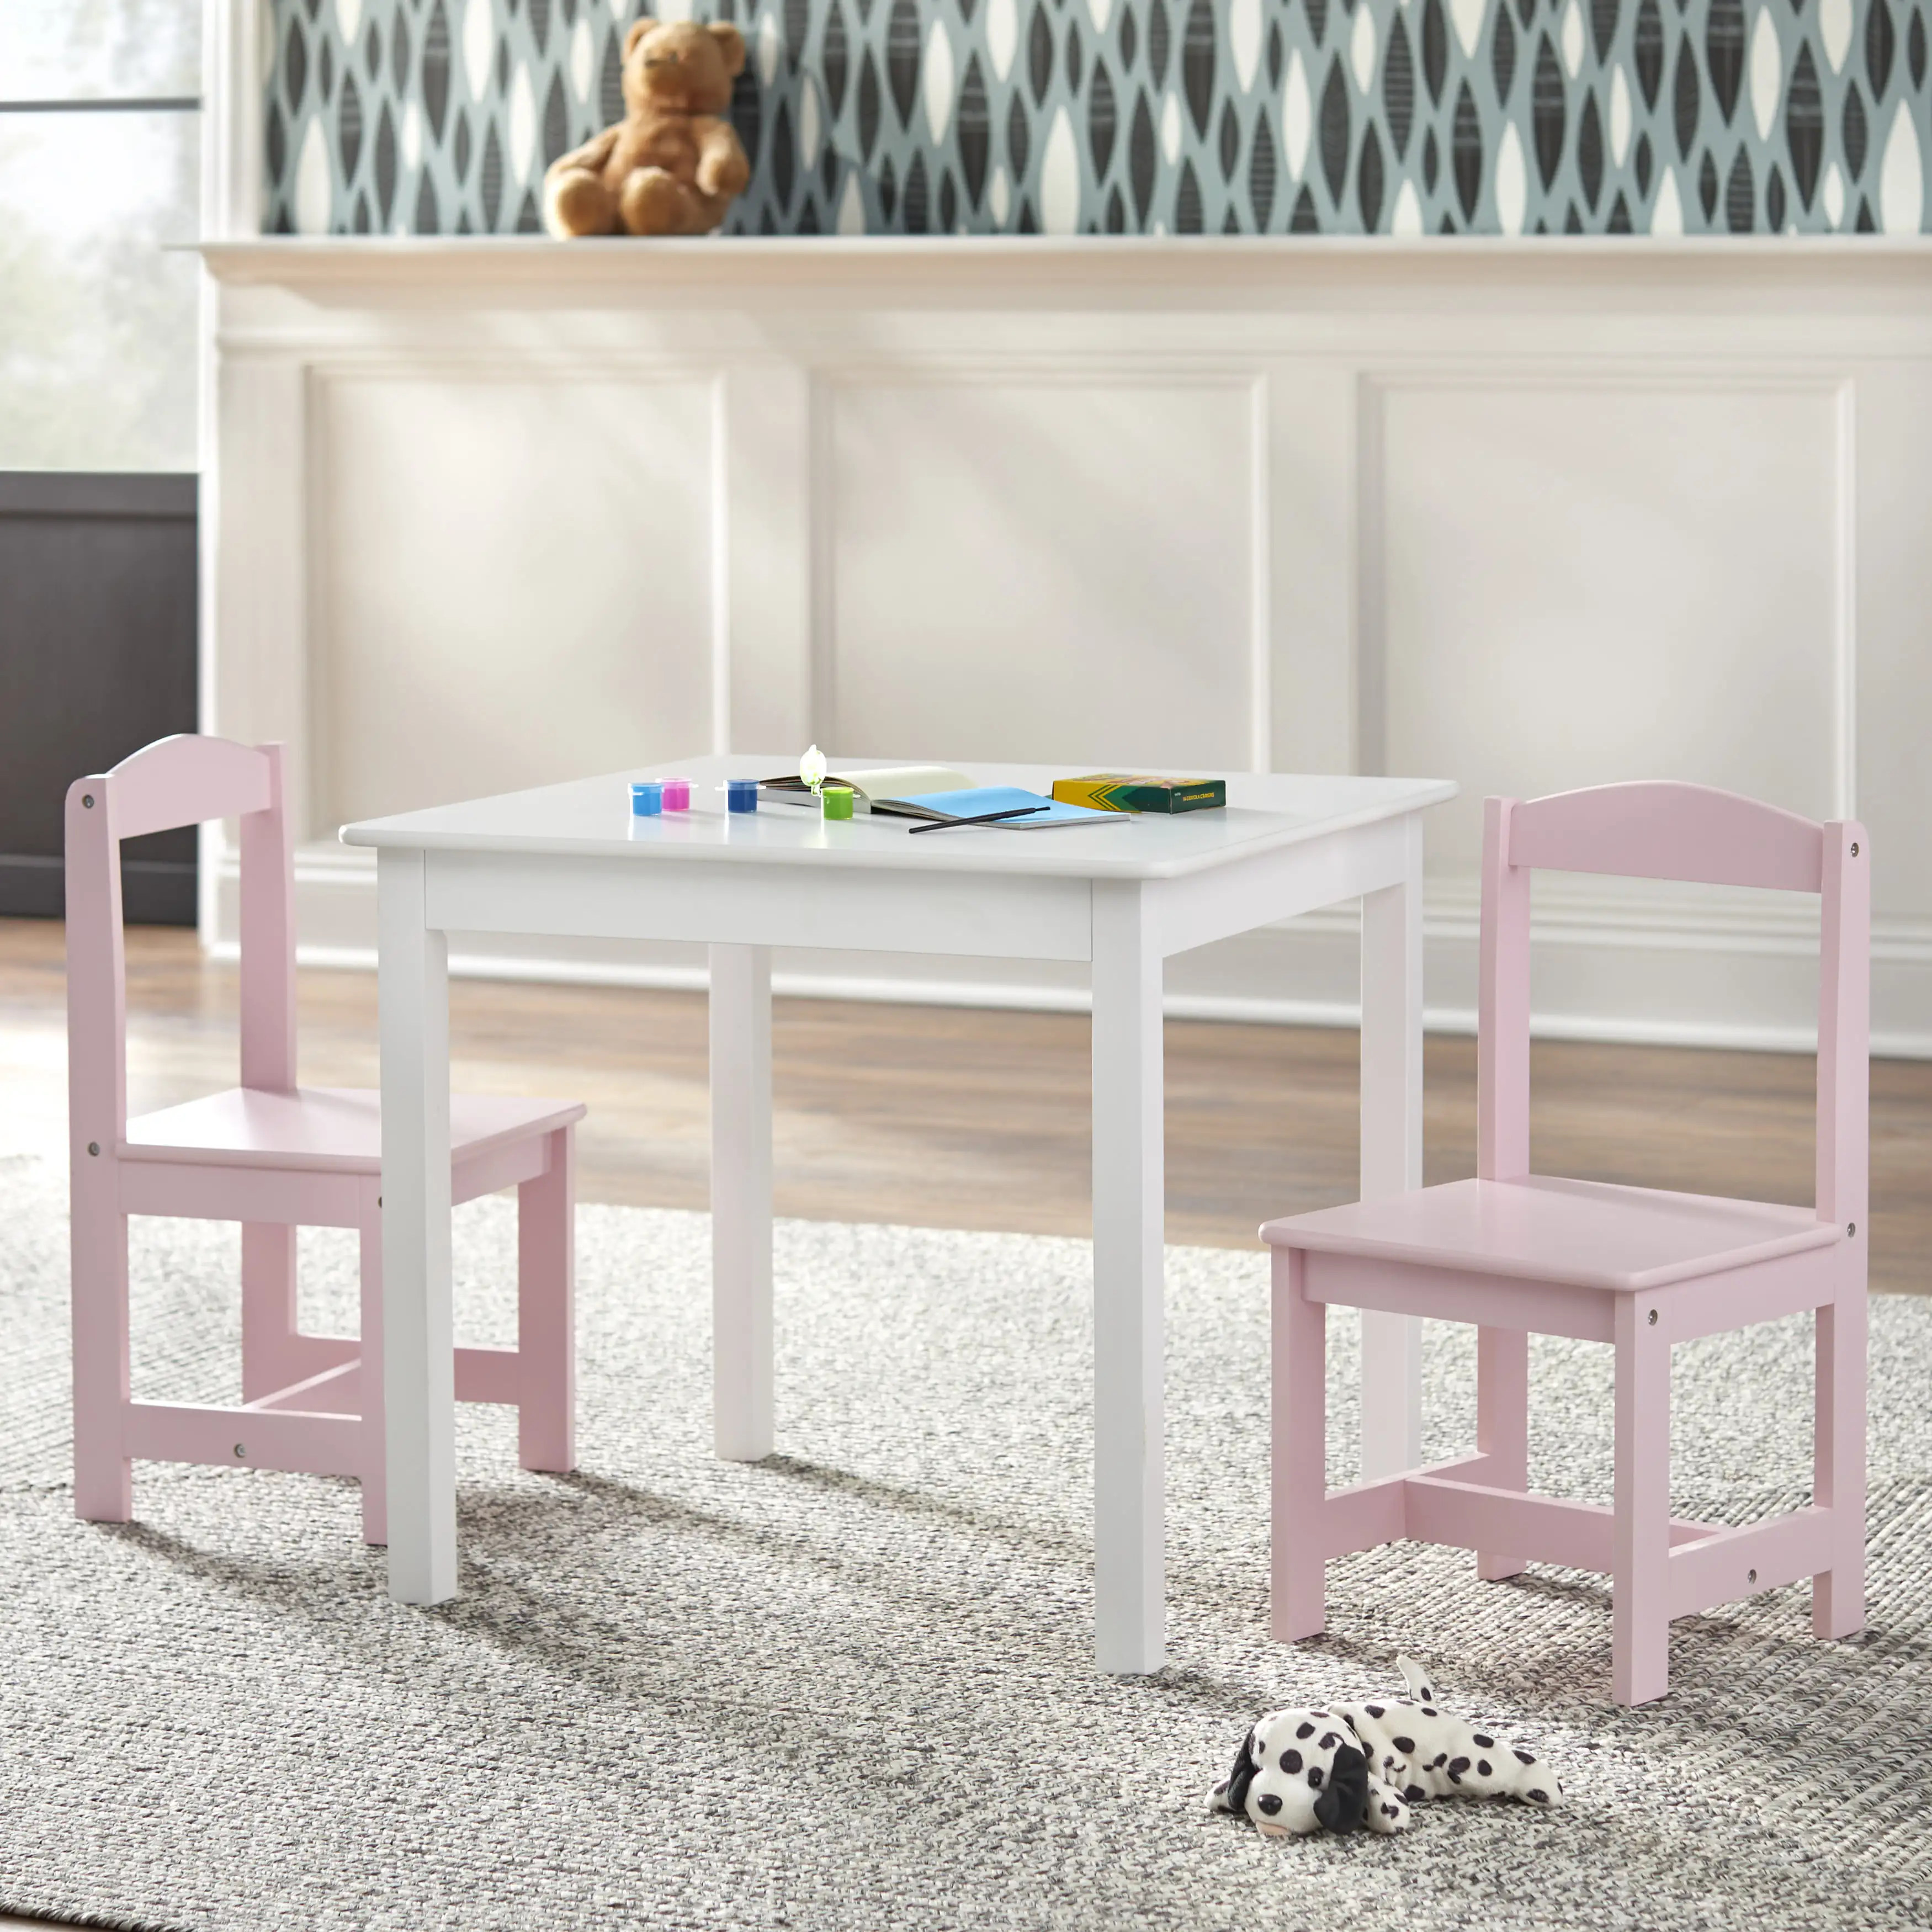 Kids 3-Piece Table and Chair Set, Multiple Colors discover 5 piece wood kids table